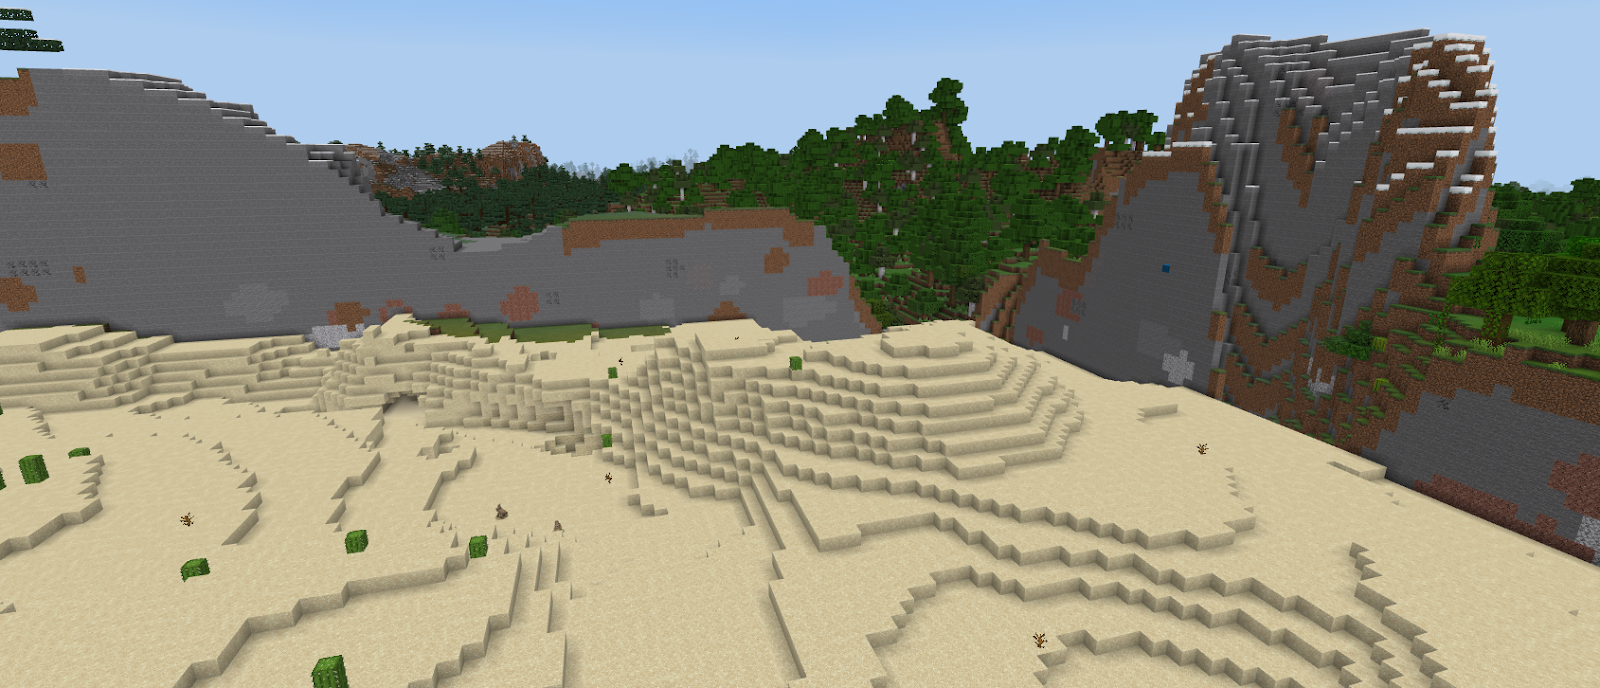 Displaced terrain when mixing generation from different editions